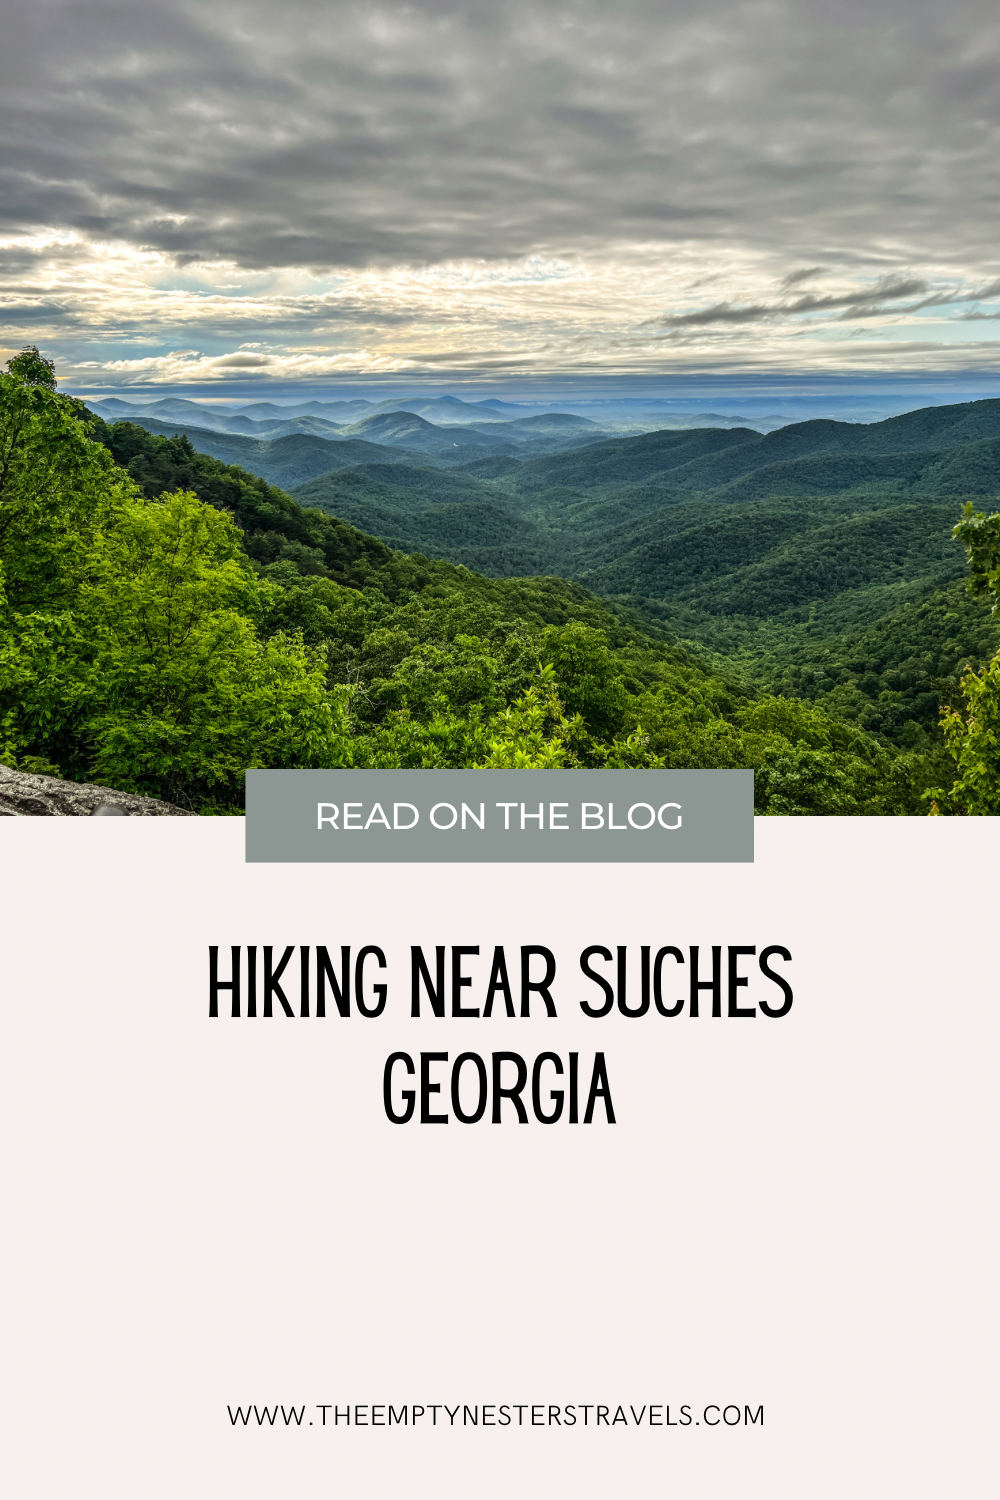 Memorial Day 3-Day Weekend: Awesome Hiking in the North Georgia Mountains